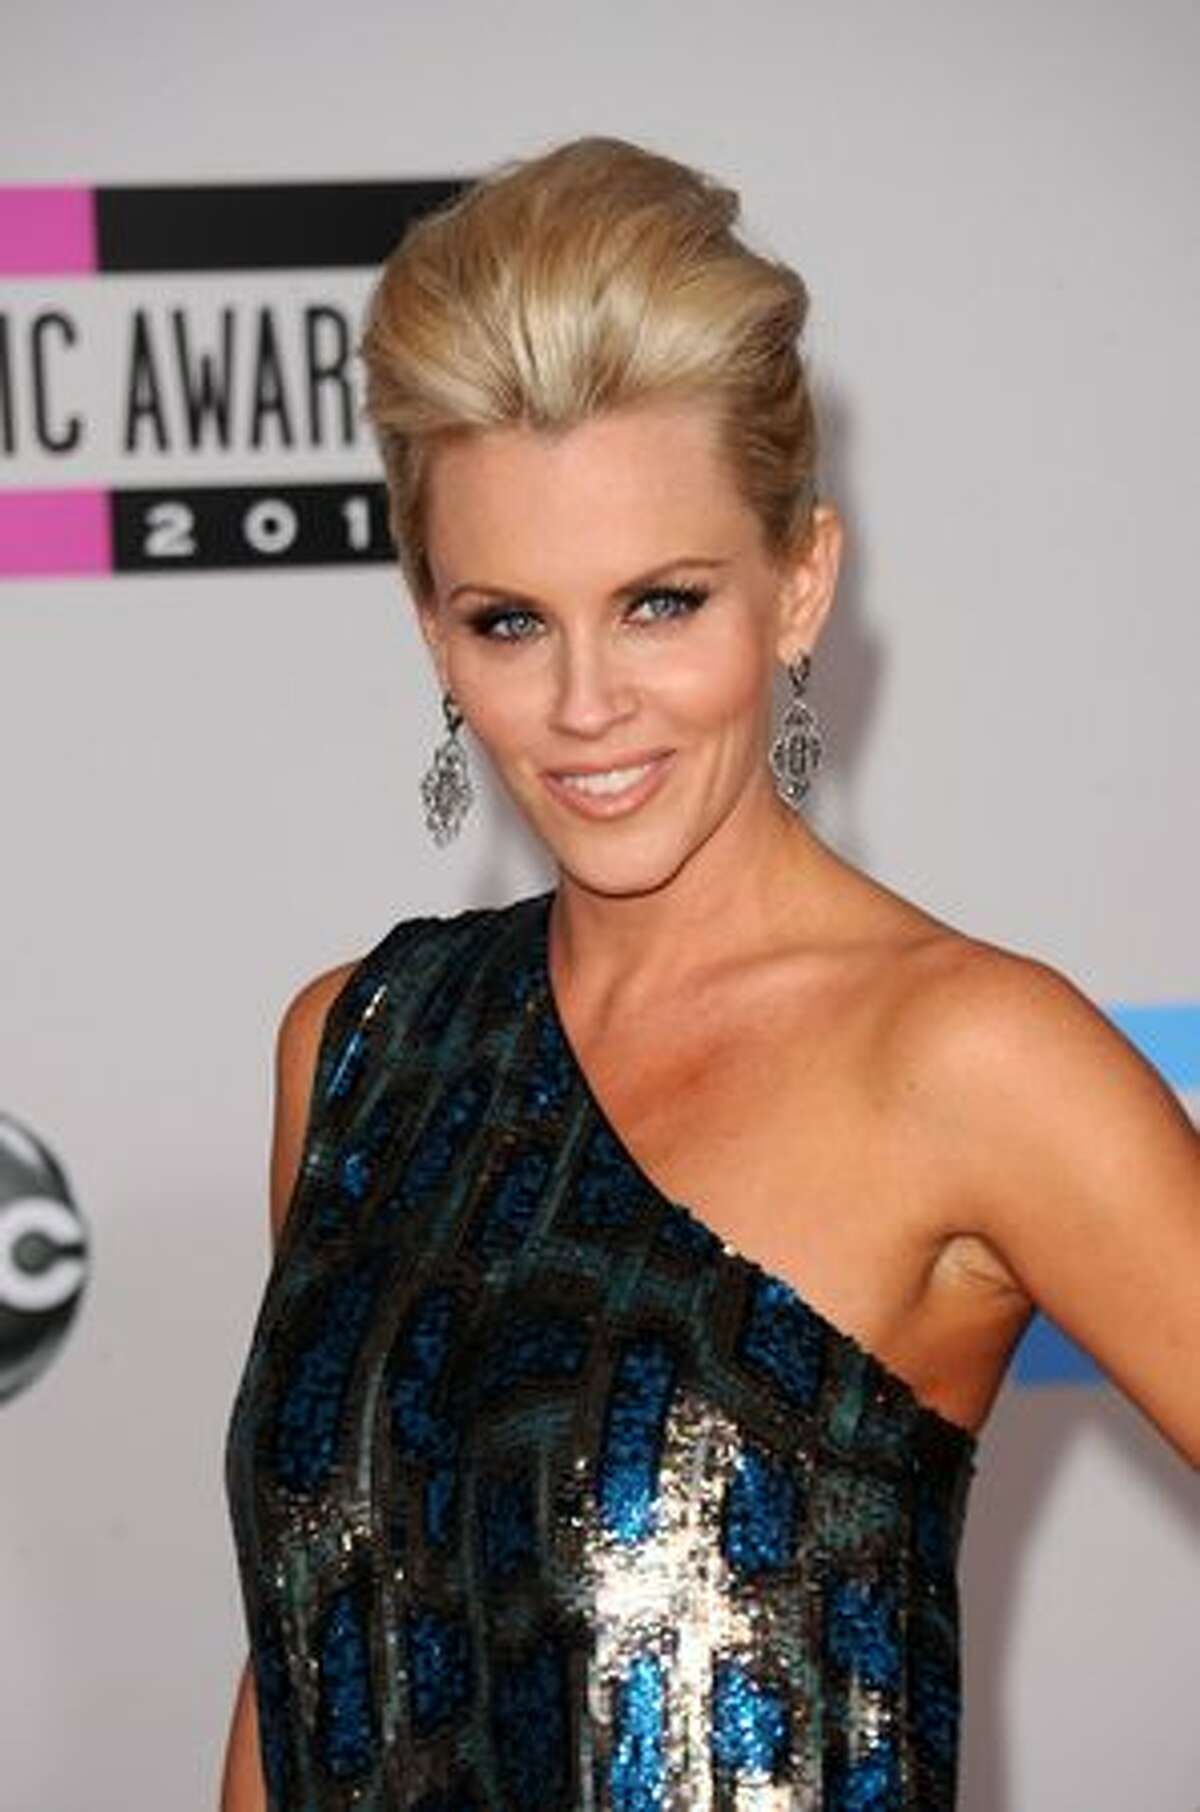 Actress/comedian Jenny McCarthy arrives at the 2010 American Music Awards held at Nokia Theatre L.A. Live in Los Angeles.